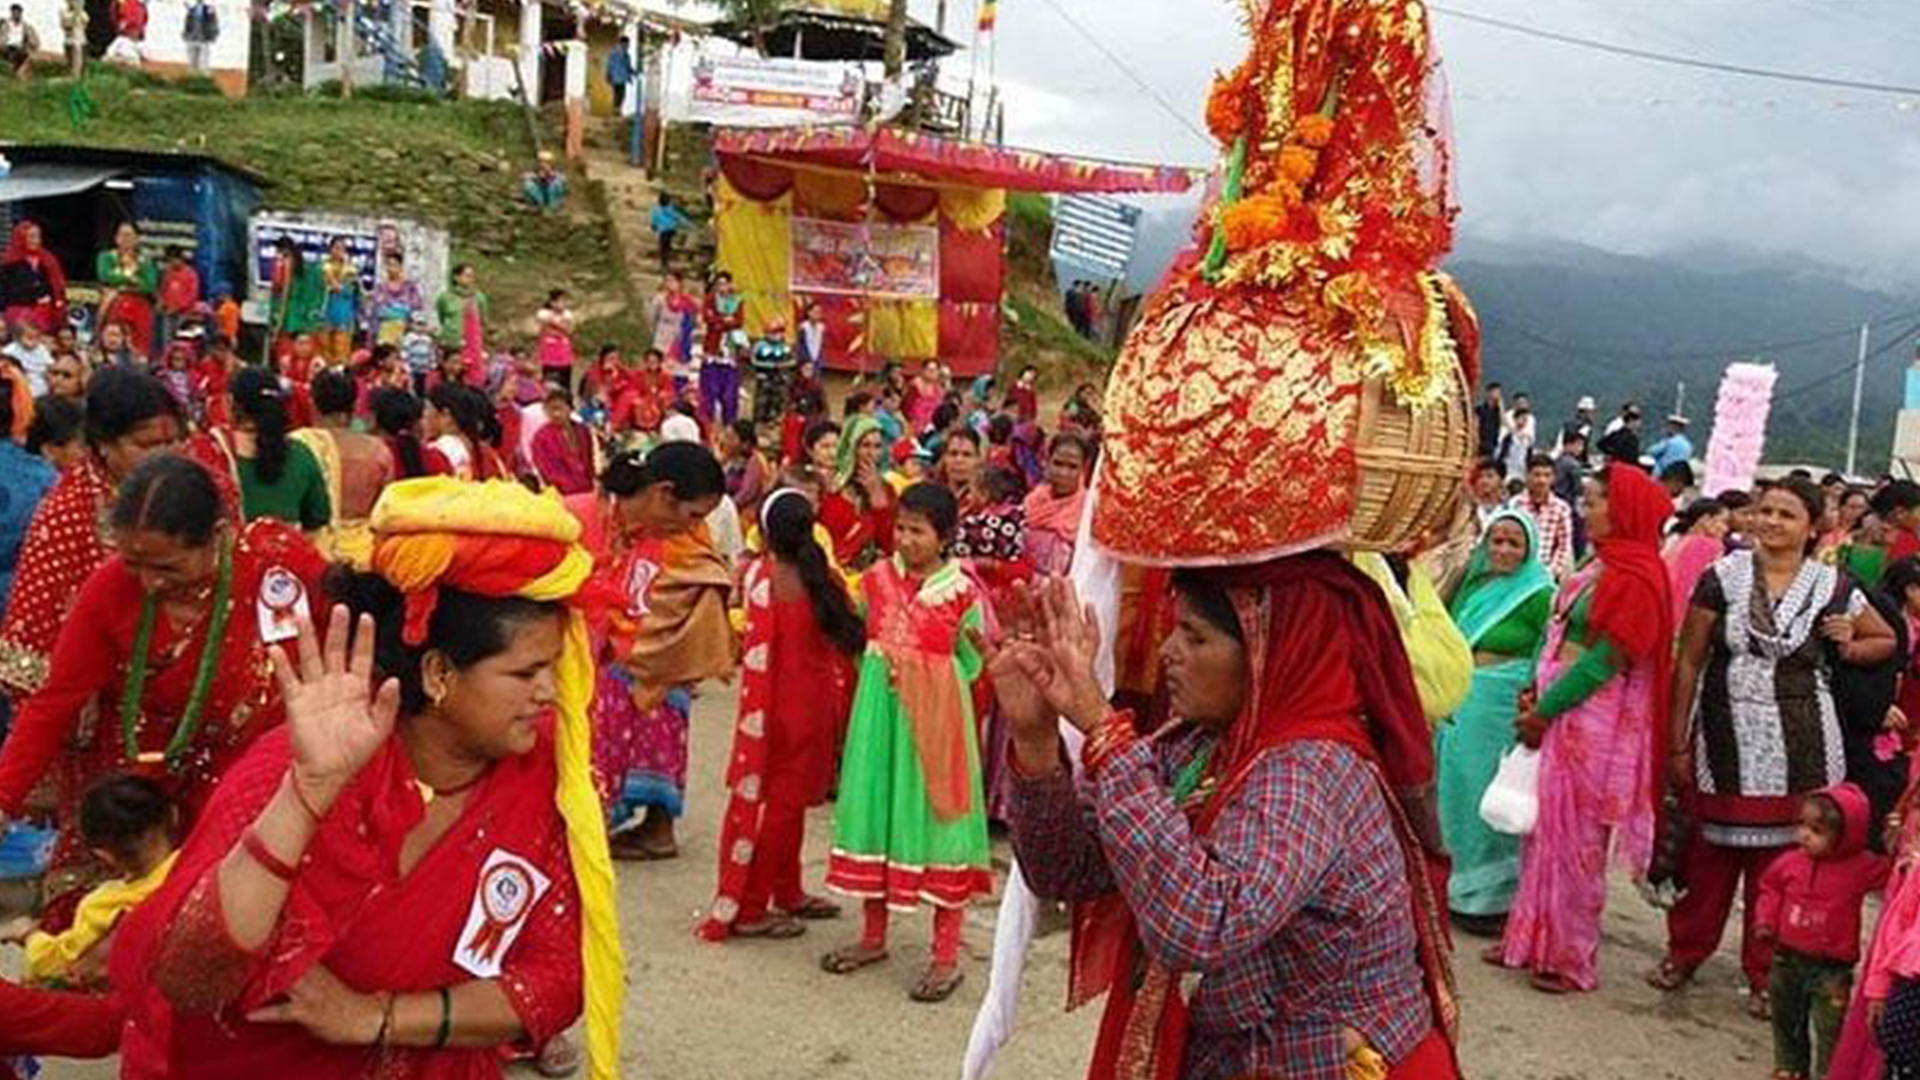 Gauraparva festival being celebrated today